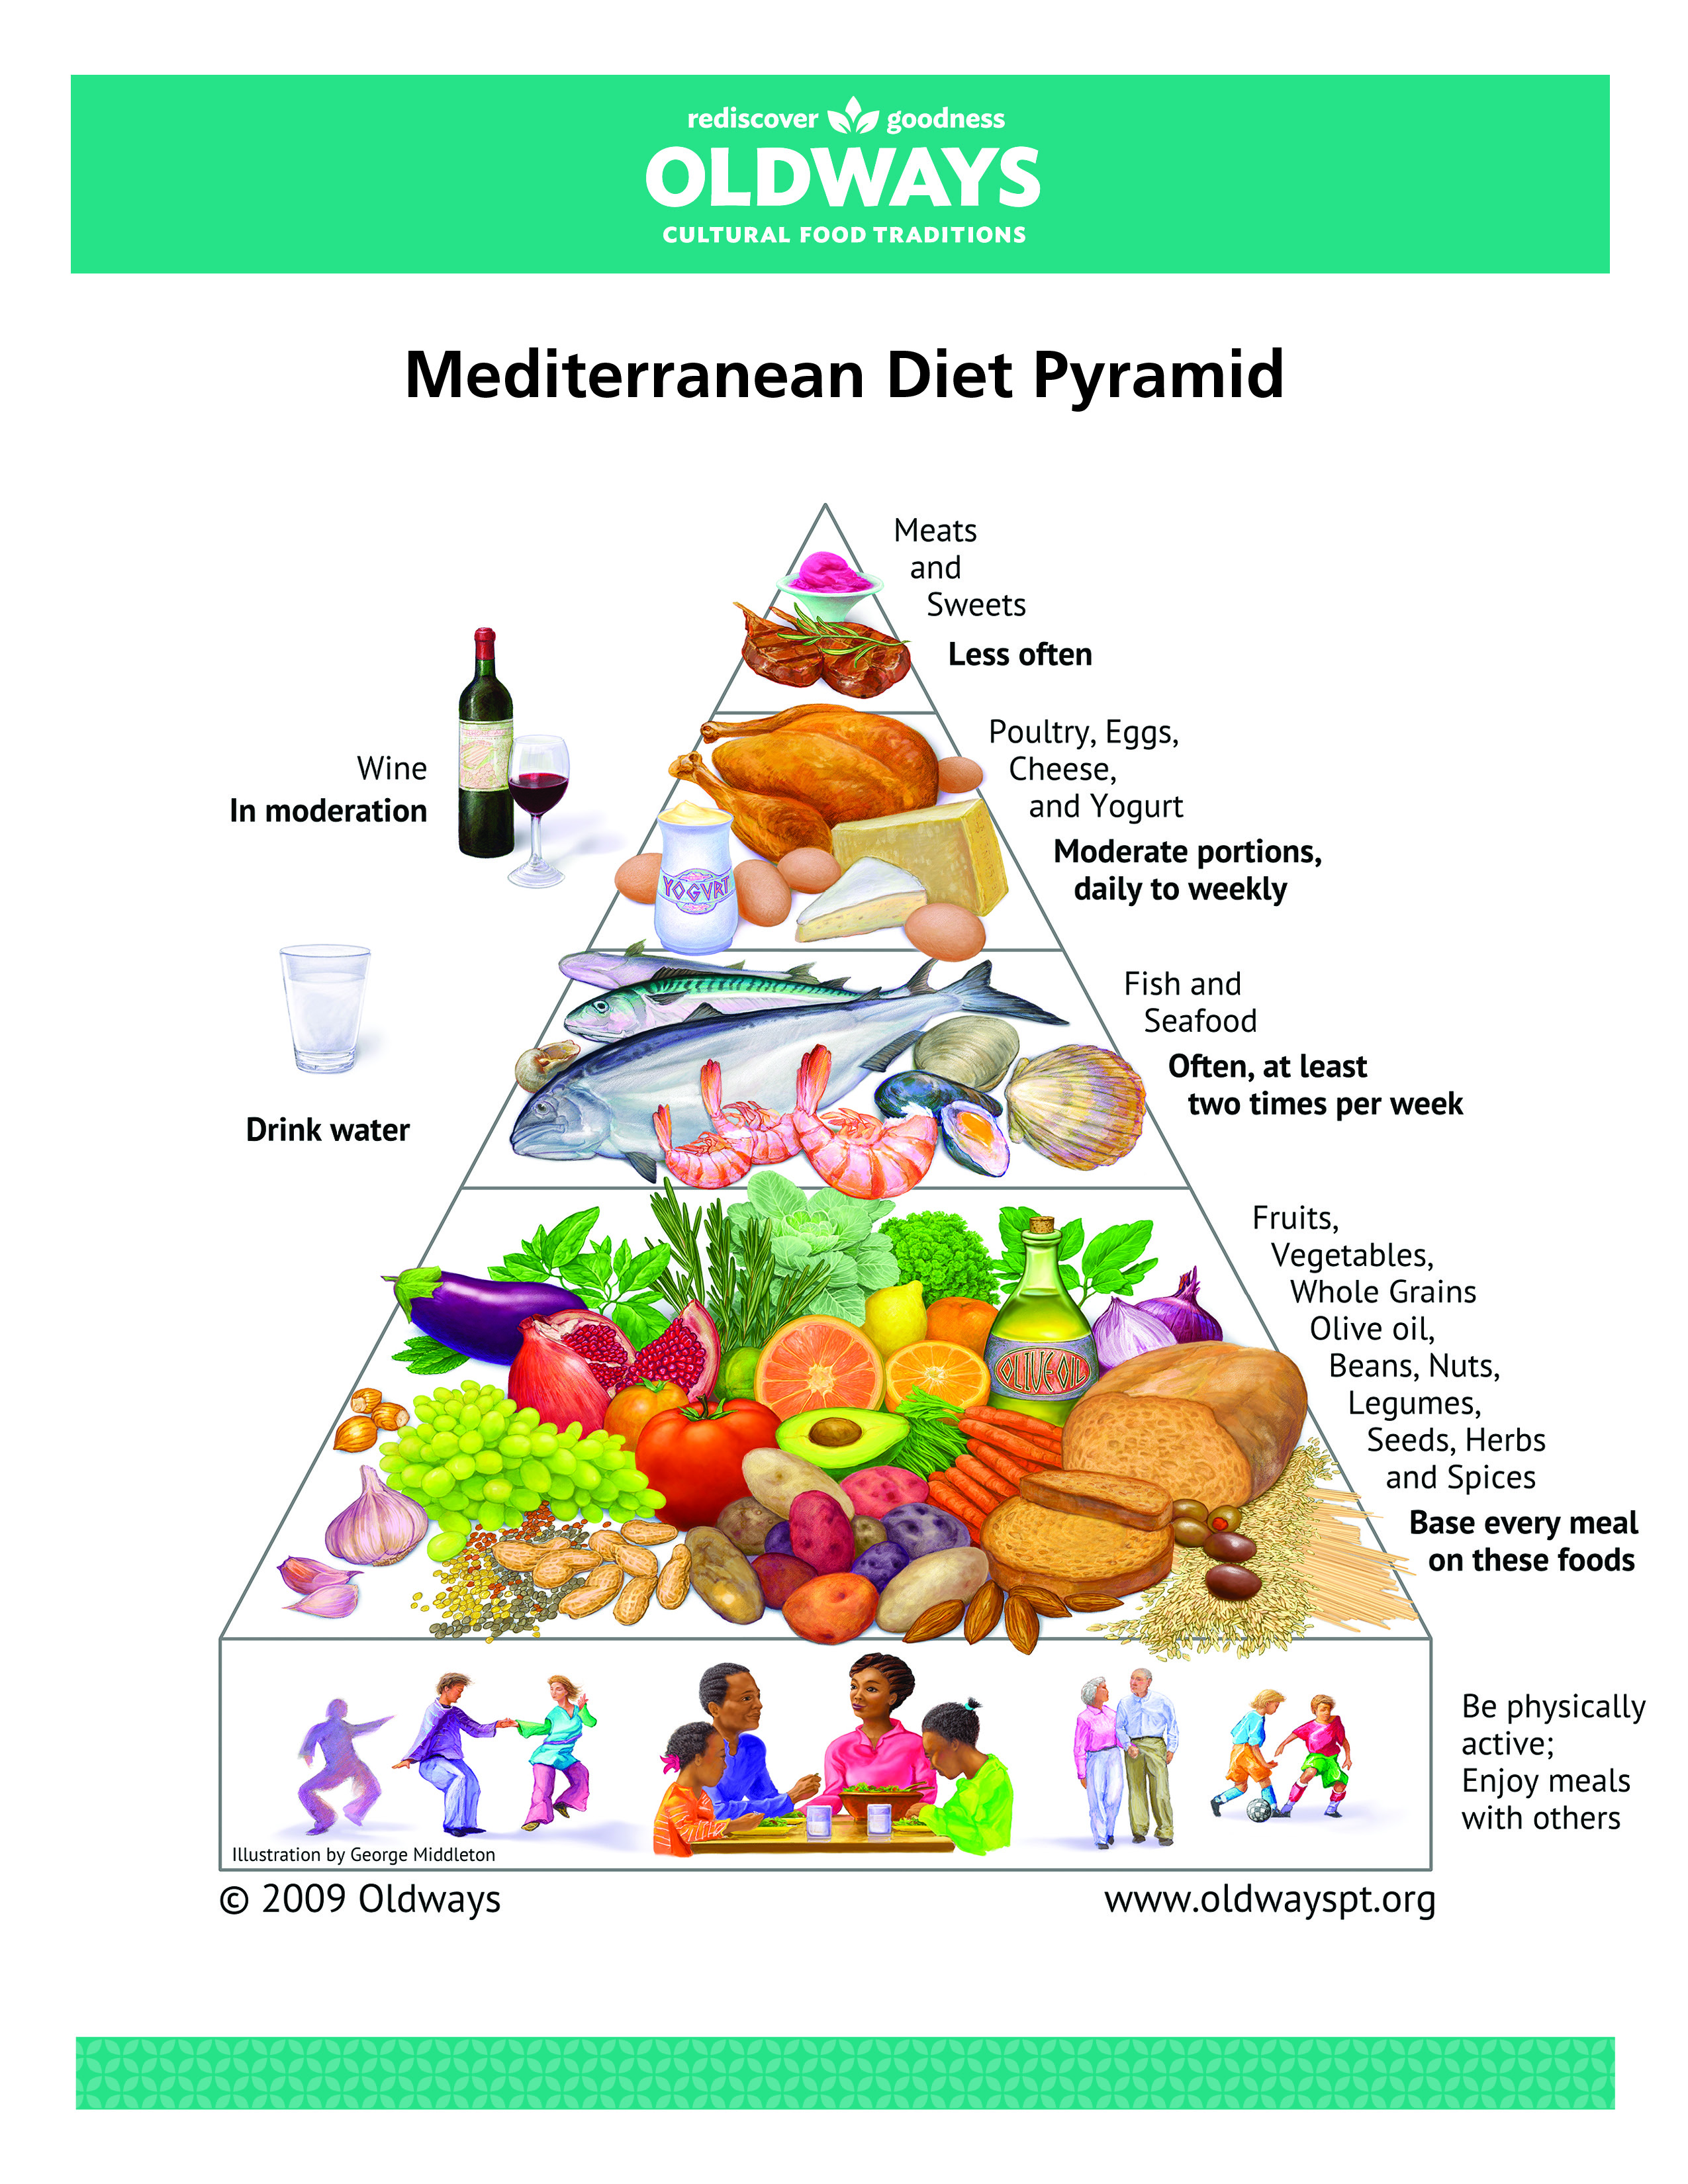 Mediterranean Diet Pyramid: A contemporary approach to delicious, healthy eating. The pyramid is divided into five blocks. From top to bottom: Top block: Meats and sweets. Eat these less often. Next block: Poultry, eggs, cheese, and yogurt. Eat these in moderate portions, daily to weekly. Next block: Fish and seafood. Eat these often, at least two times per week. Next block: Fruits, vegetables, grains (mostly whole), olive oil, beans, nuts, legumes and seeds, herbs and spices. Base every meal on these foods. Last block: Be physically active; enjoy meals with others. It is also noted, off to the side, that water should be drunk regularly, and that wine can be drunk in moderation. Illustration by George Middleton. Copyright 2009, Oldways Preservation and Exchange Trust. www.oldwayspt.org